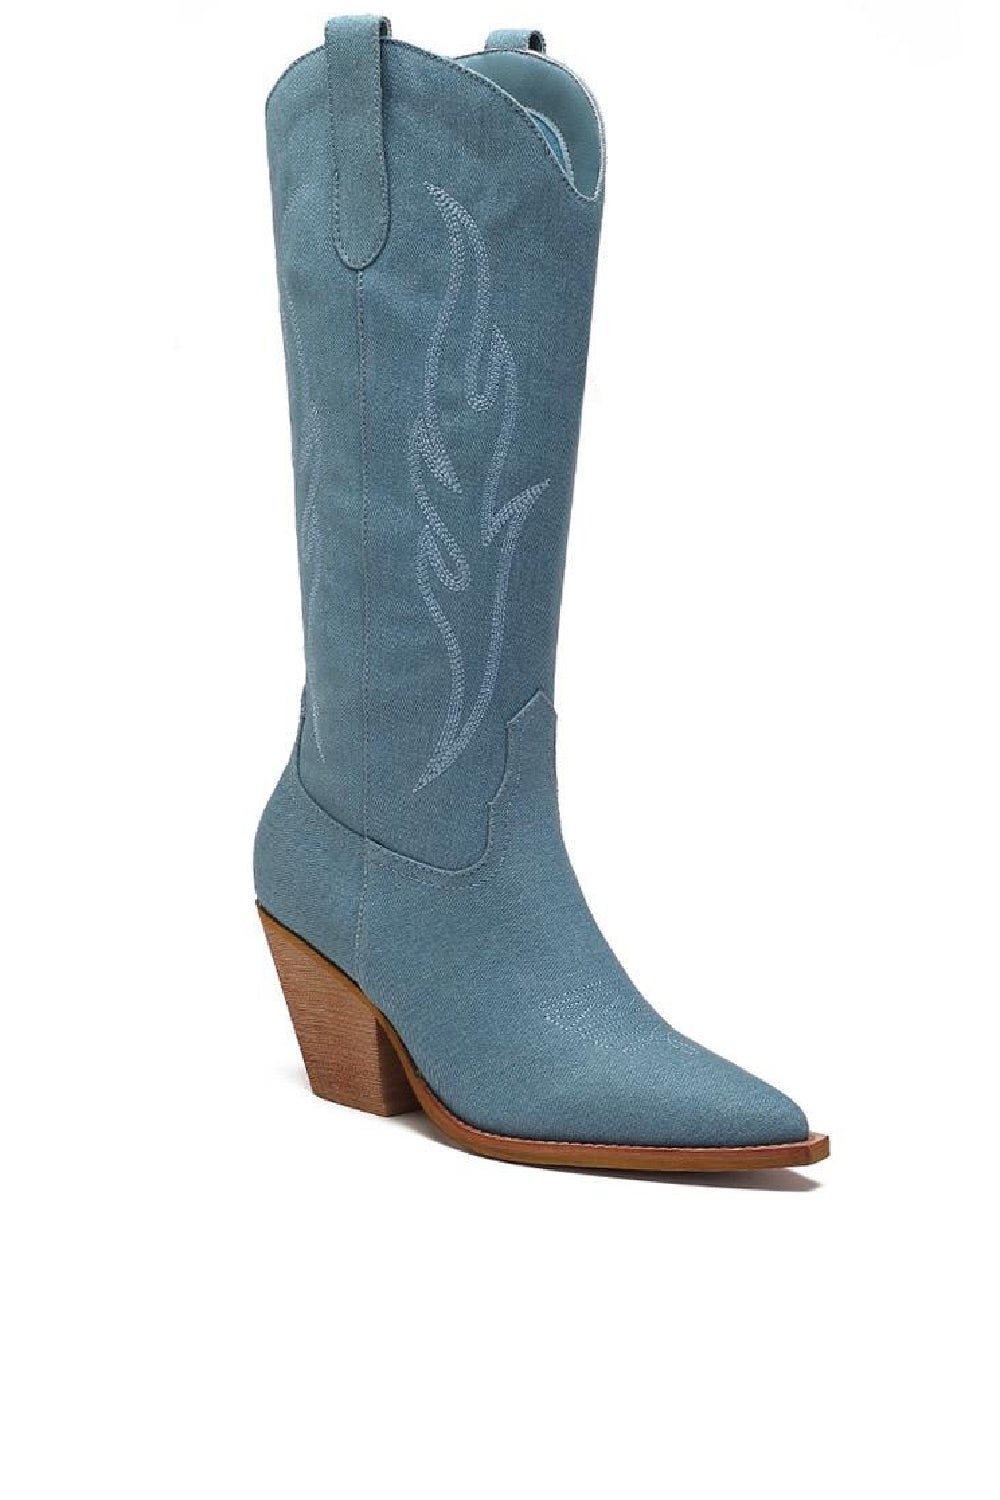 BLUE EMBROIDERY DETAIL WESTERN BOOTS KNEE HIGH COWBOY BOOTS